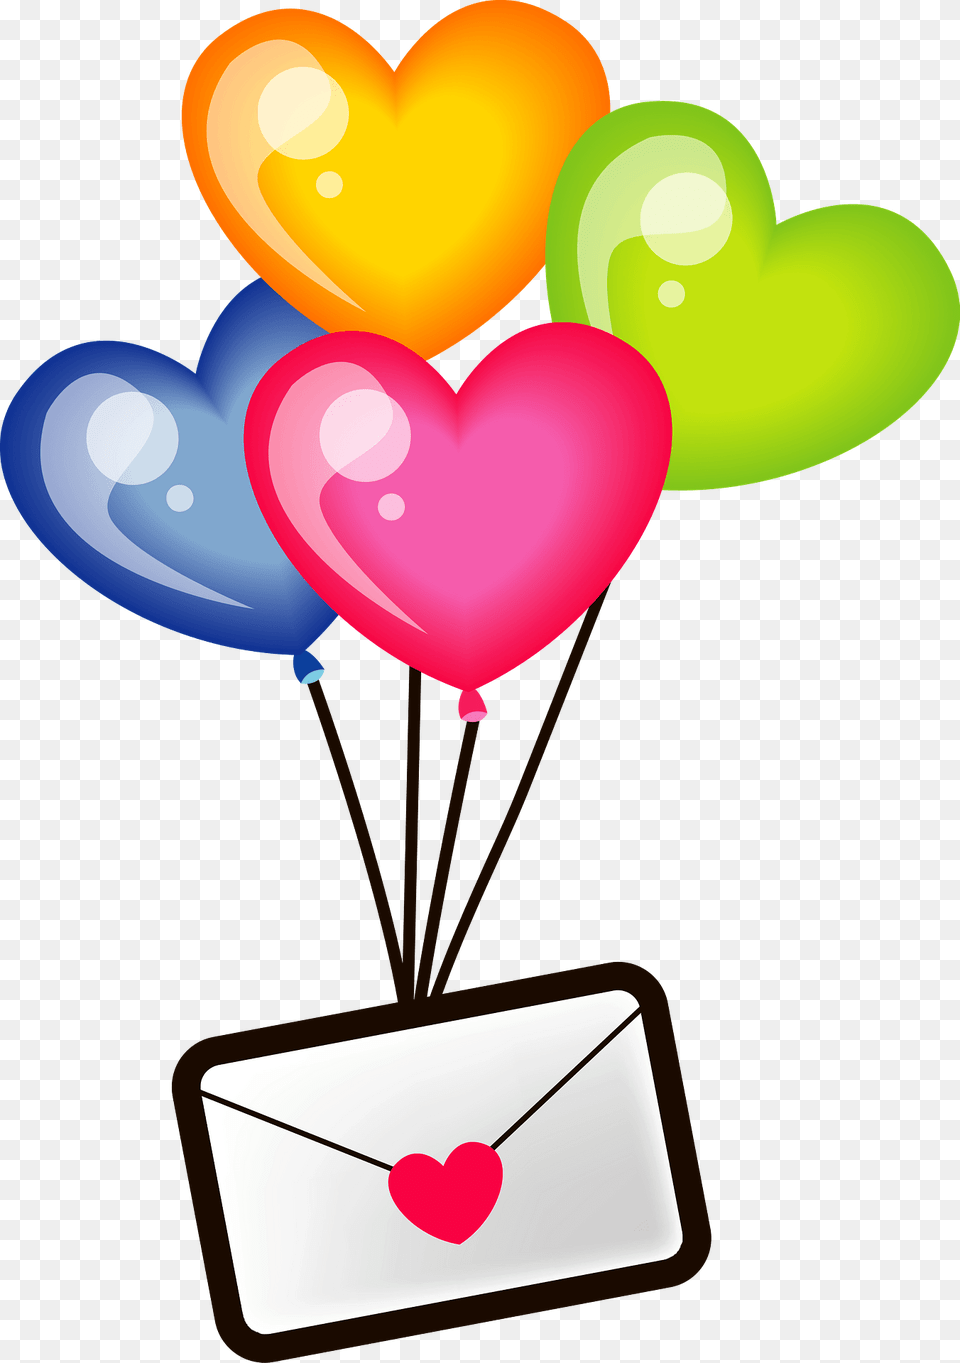 Love Letter With Heart Balloons Clipart, Balloon, Envelope, Mail Png Image